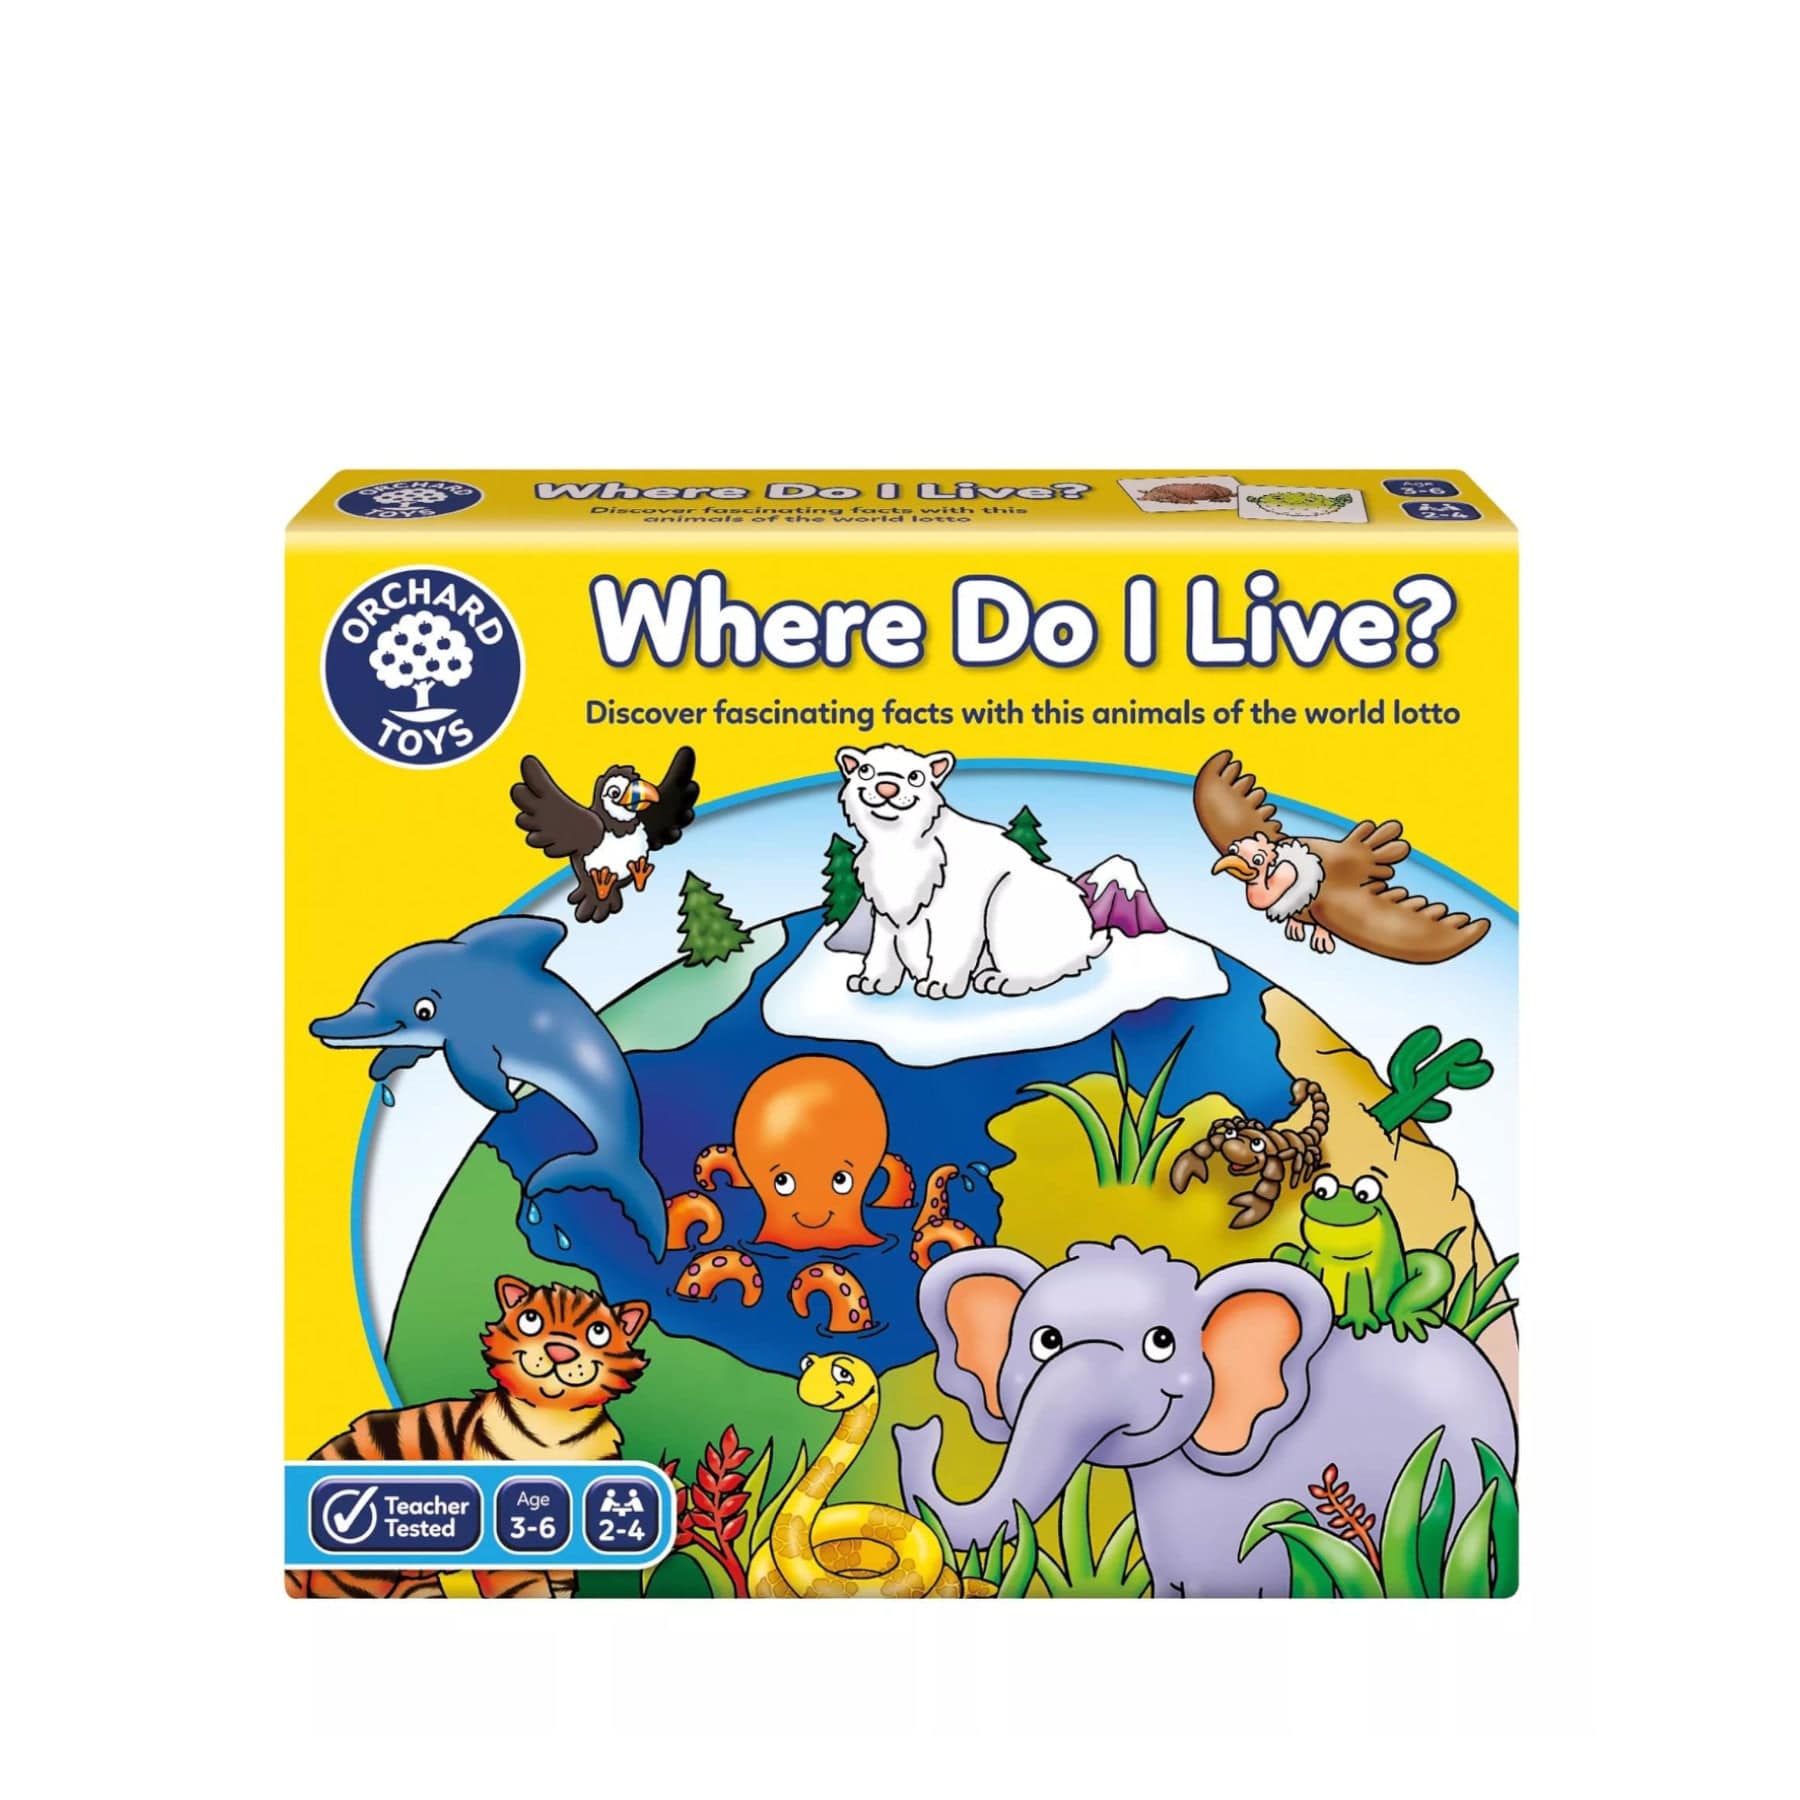 Educational children's board game "Where Do I Live?" by Orchard Toys featuring various animals such as dolphin, polar bear, octopus, tiger, eagle, snake, and elephant in their habitats, for ages 3-6, 2-4 players.